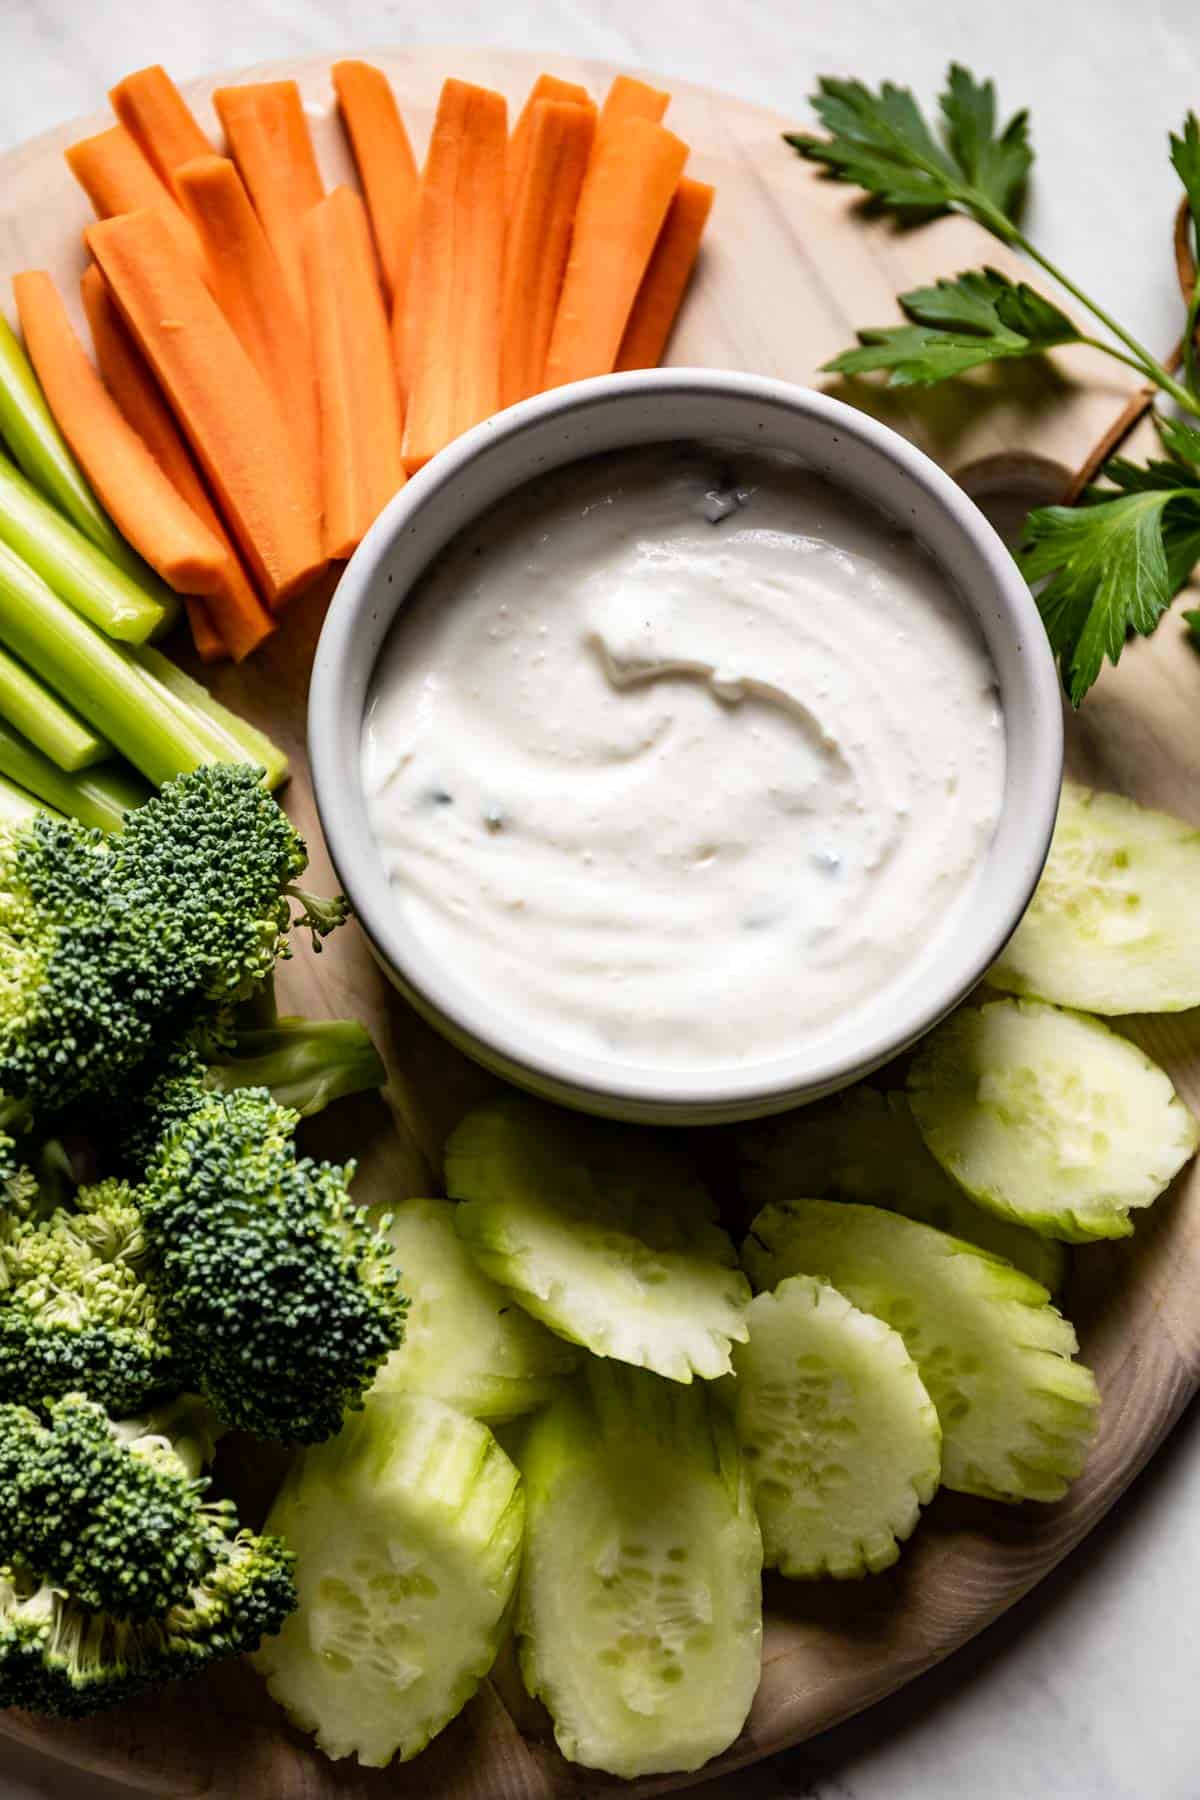 A dip with a greek yogurt base served with veggies from the top view.